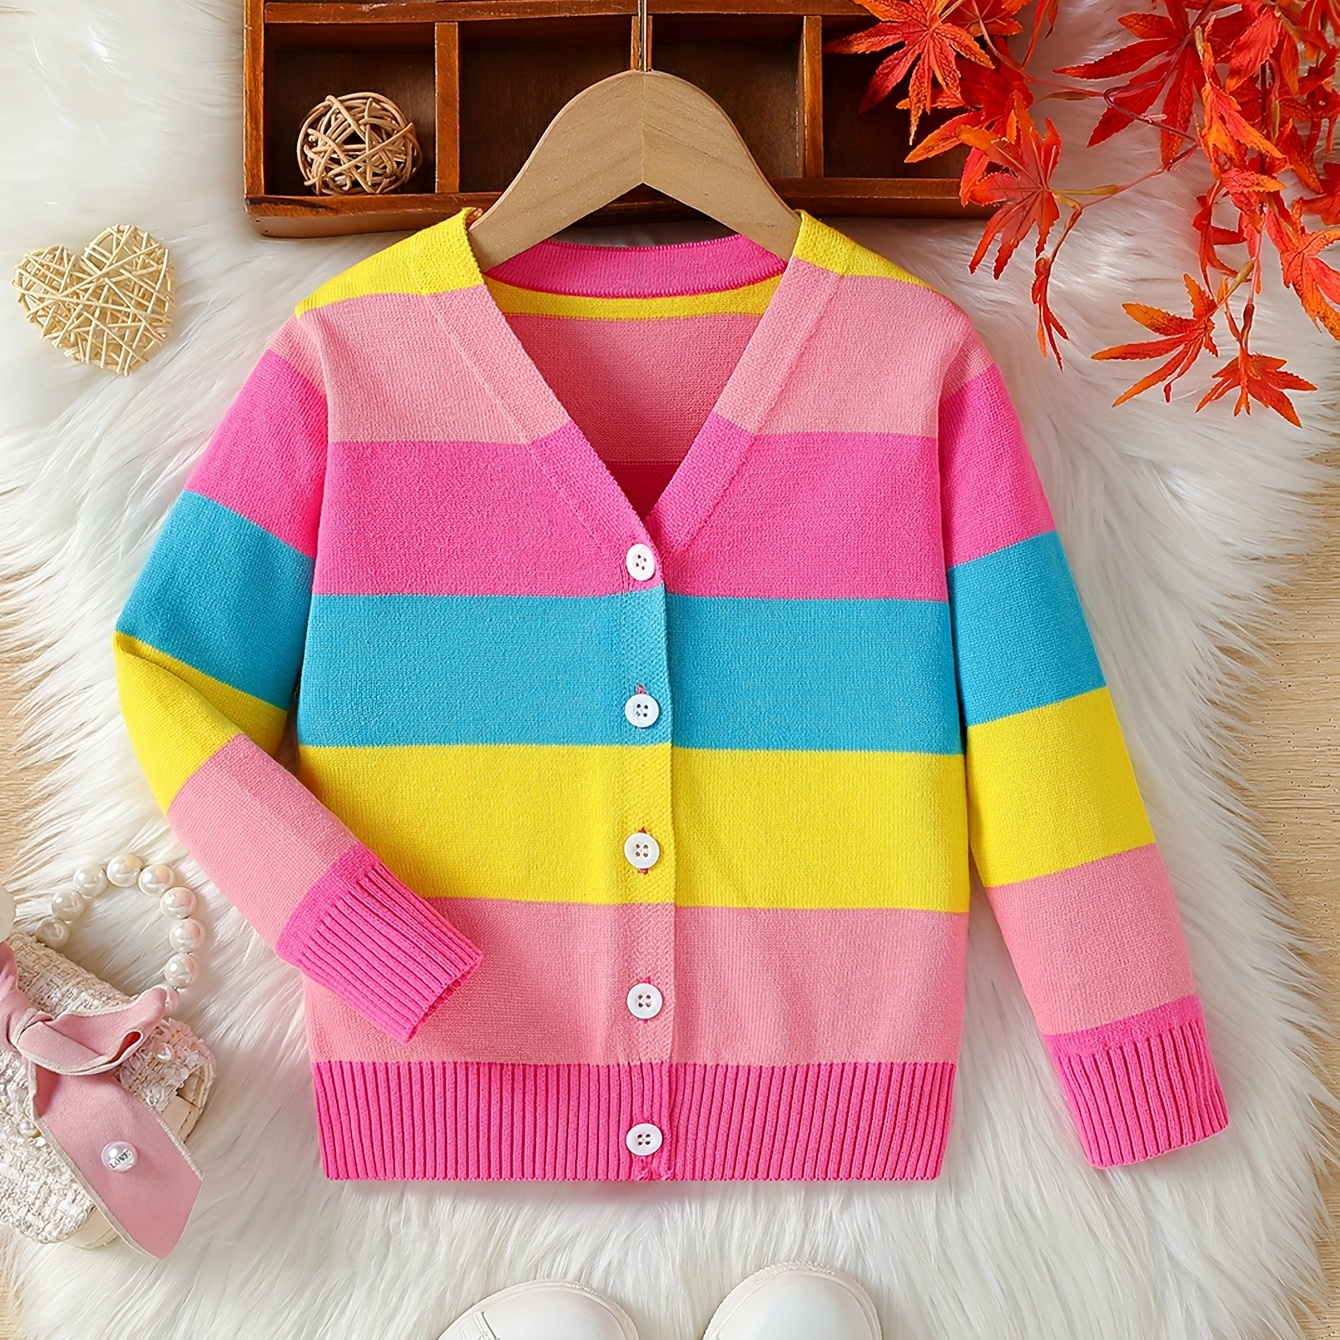 

Girls' Stylish Rainbow Pattern Thin Knitted Sweater Cardigan Coat For Fall Spring Outwear